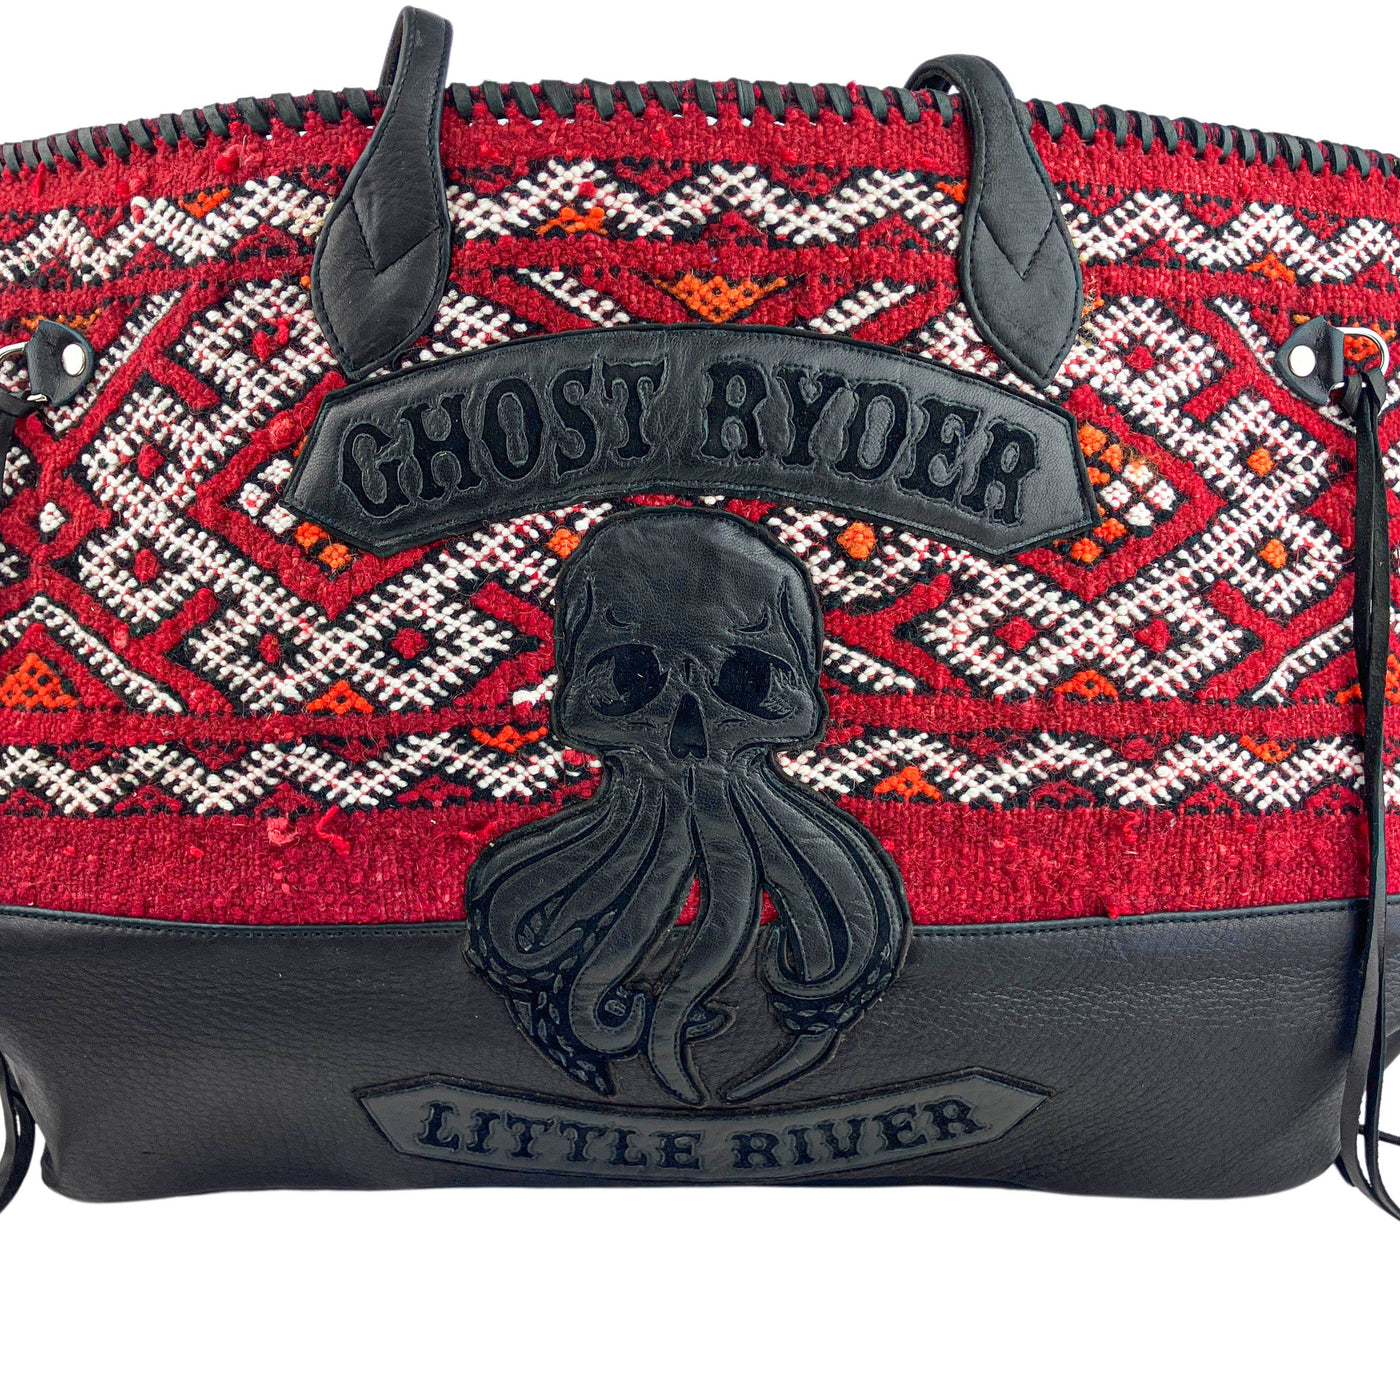 Alchemist Ghost Rider Little River Tote Bag - Discounts on Alchemist at UAL